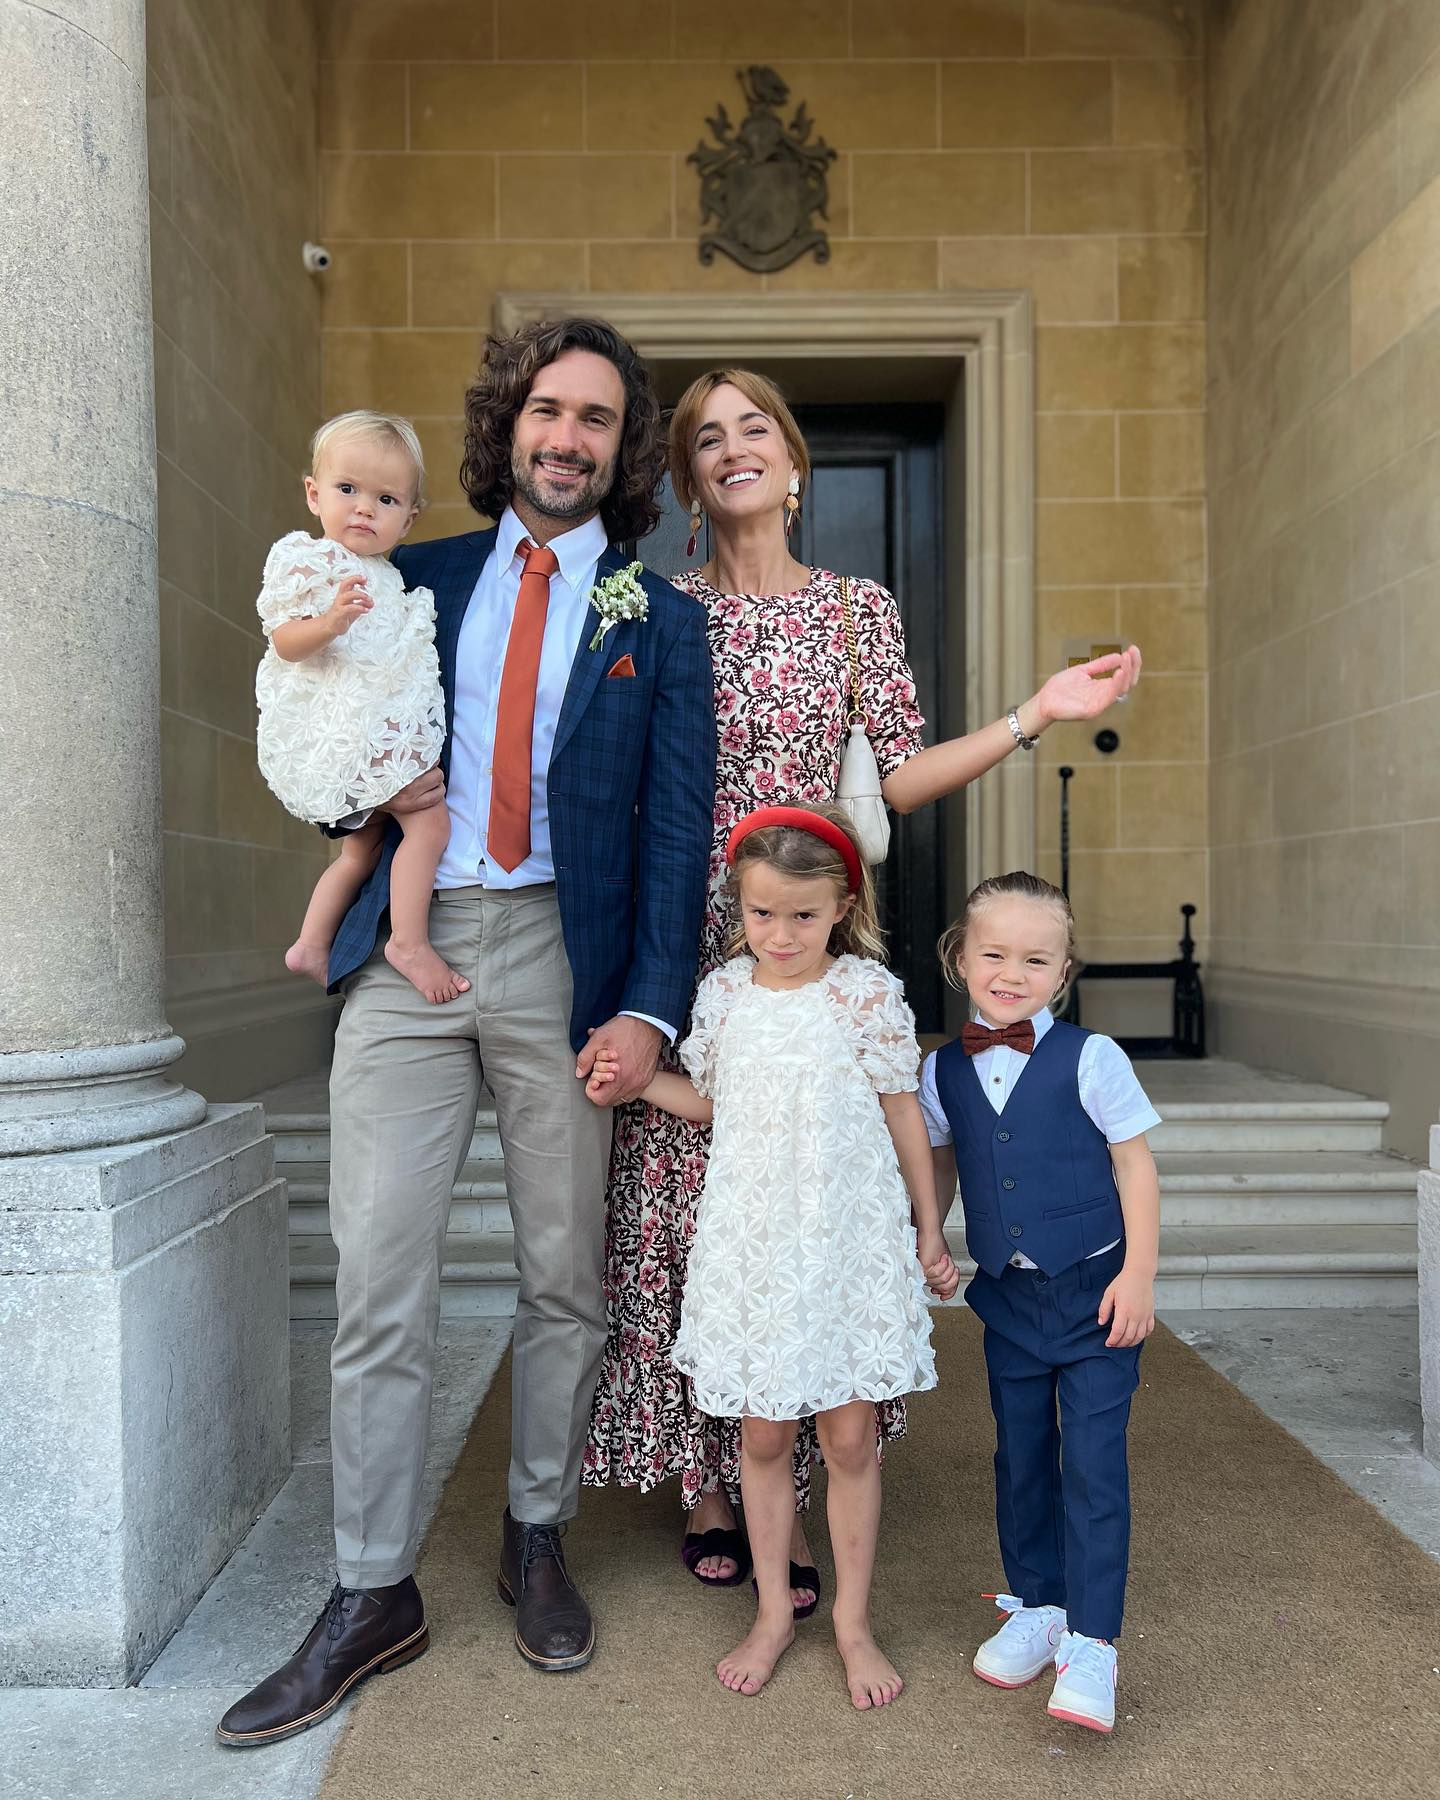 Joe and Rosie, 33, married in June 2019, with their kids